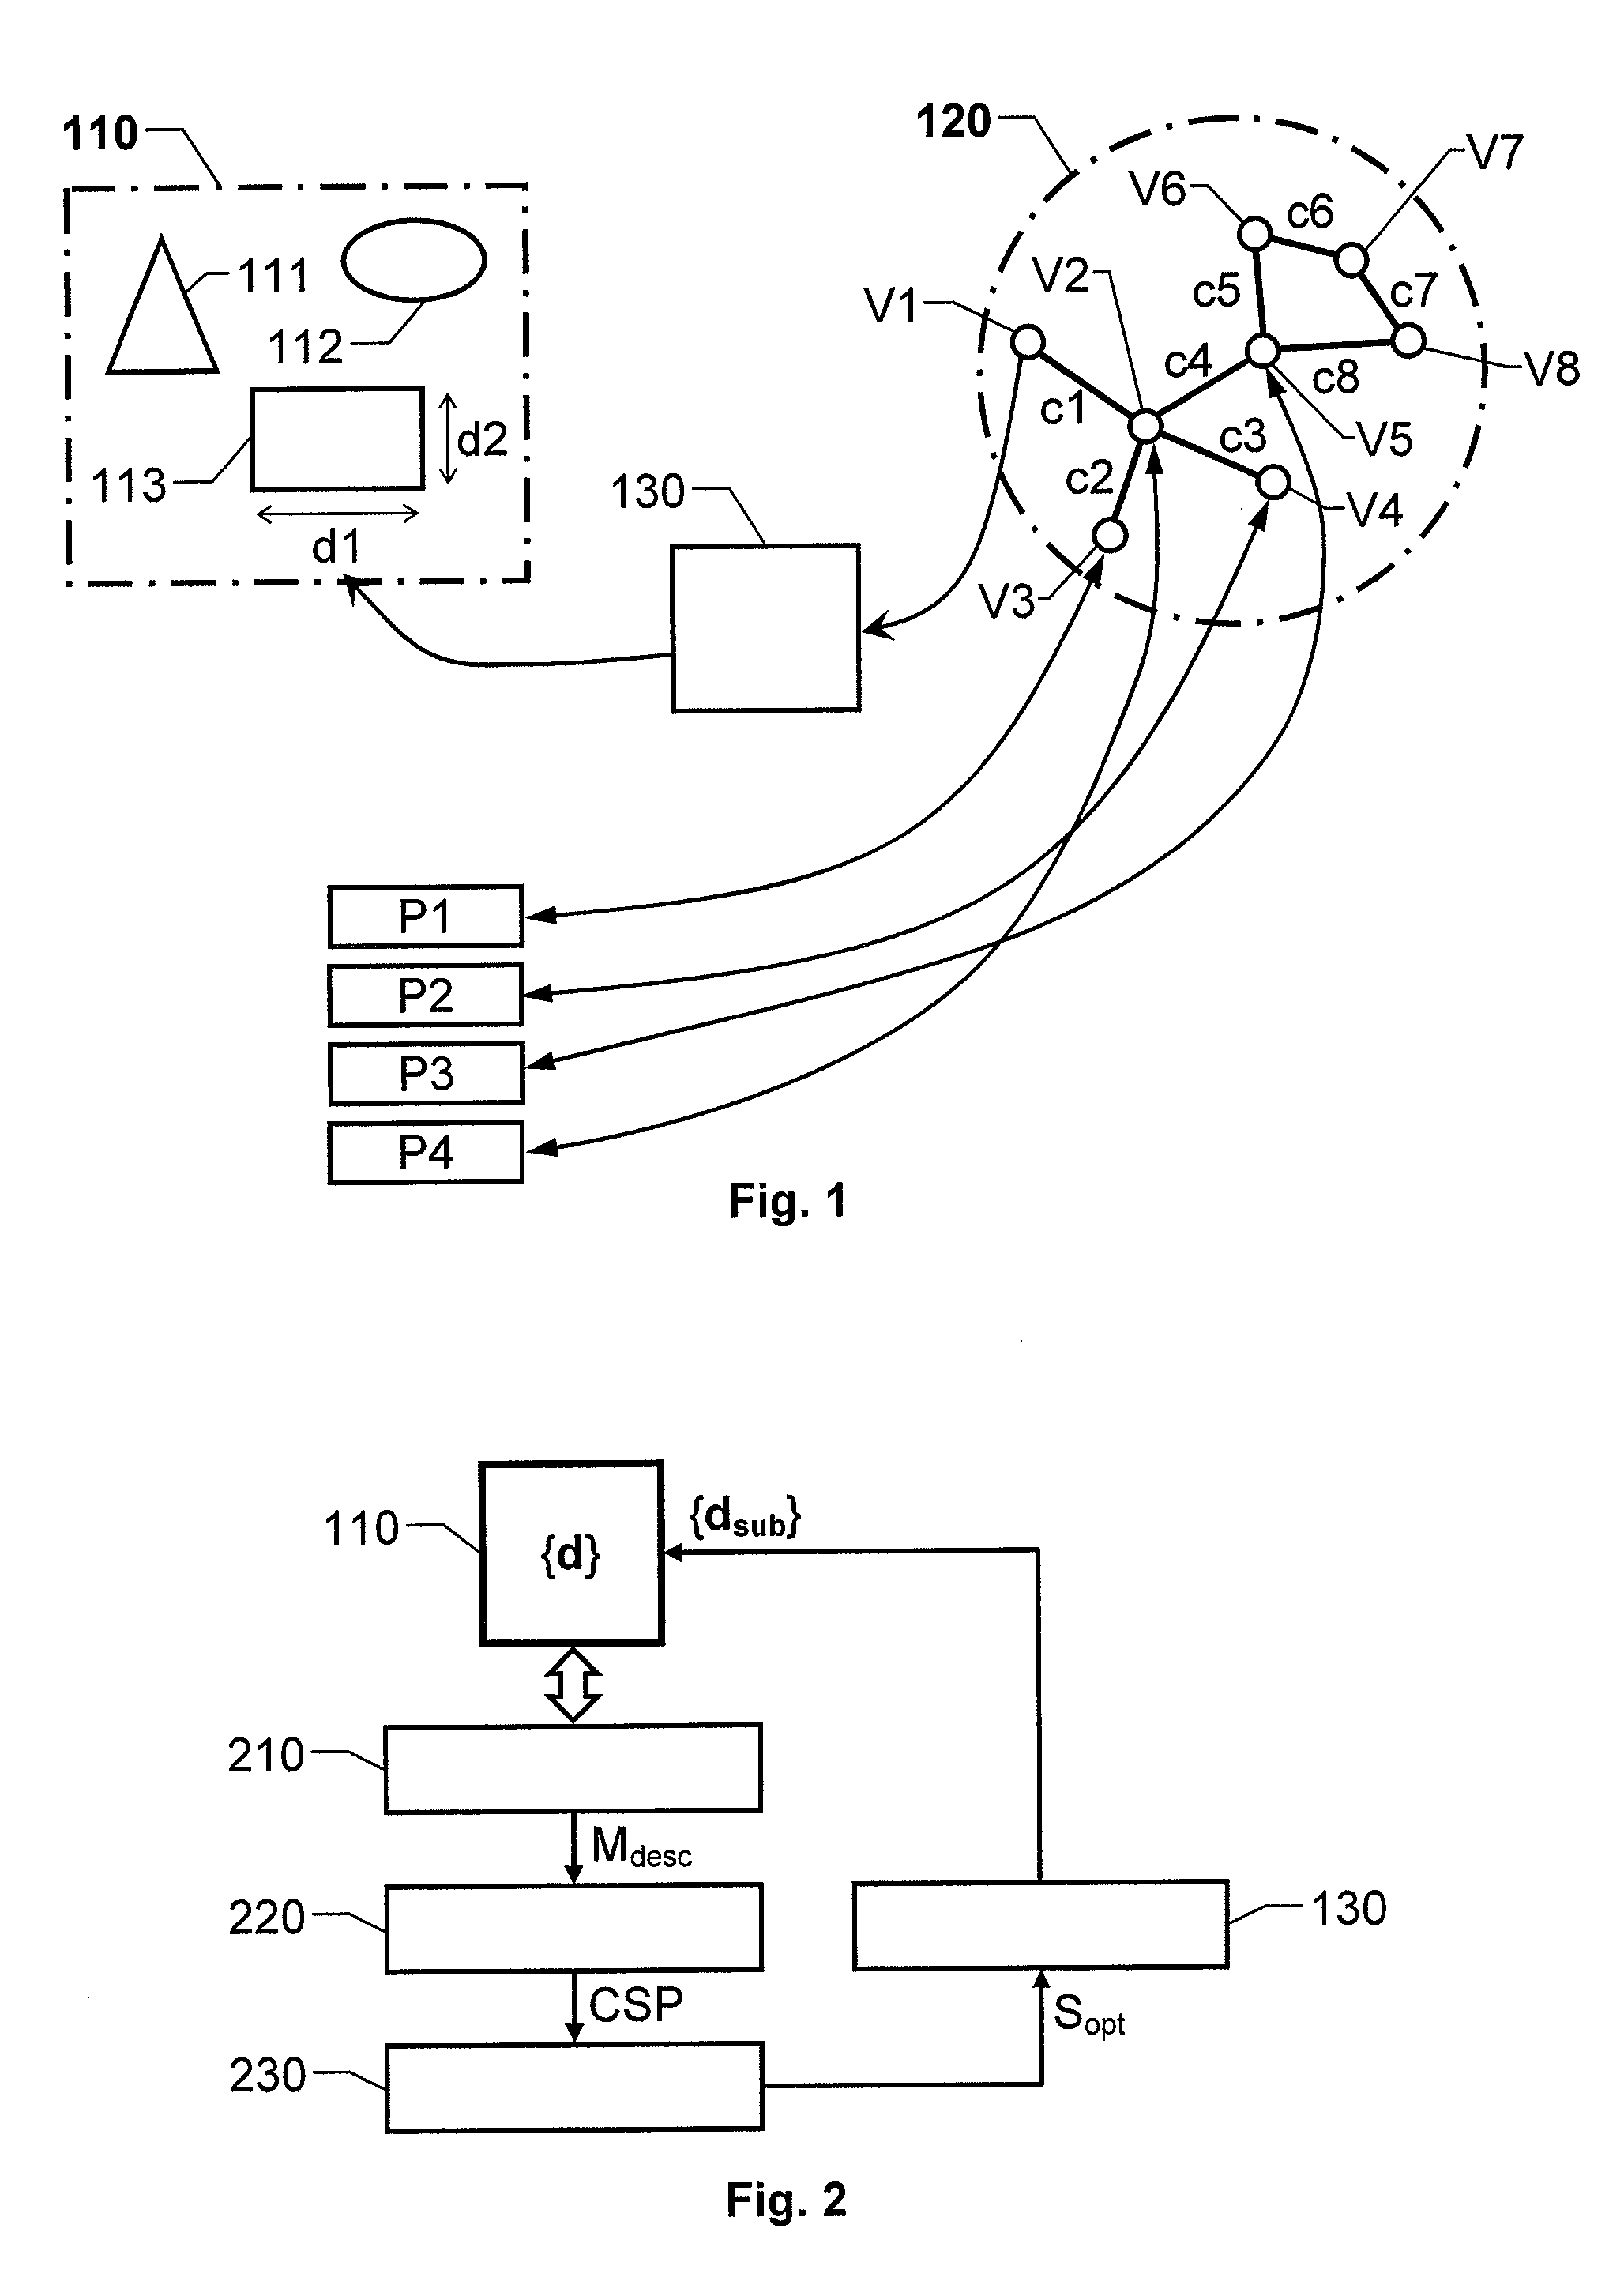 Customizing of computer aided design models